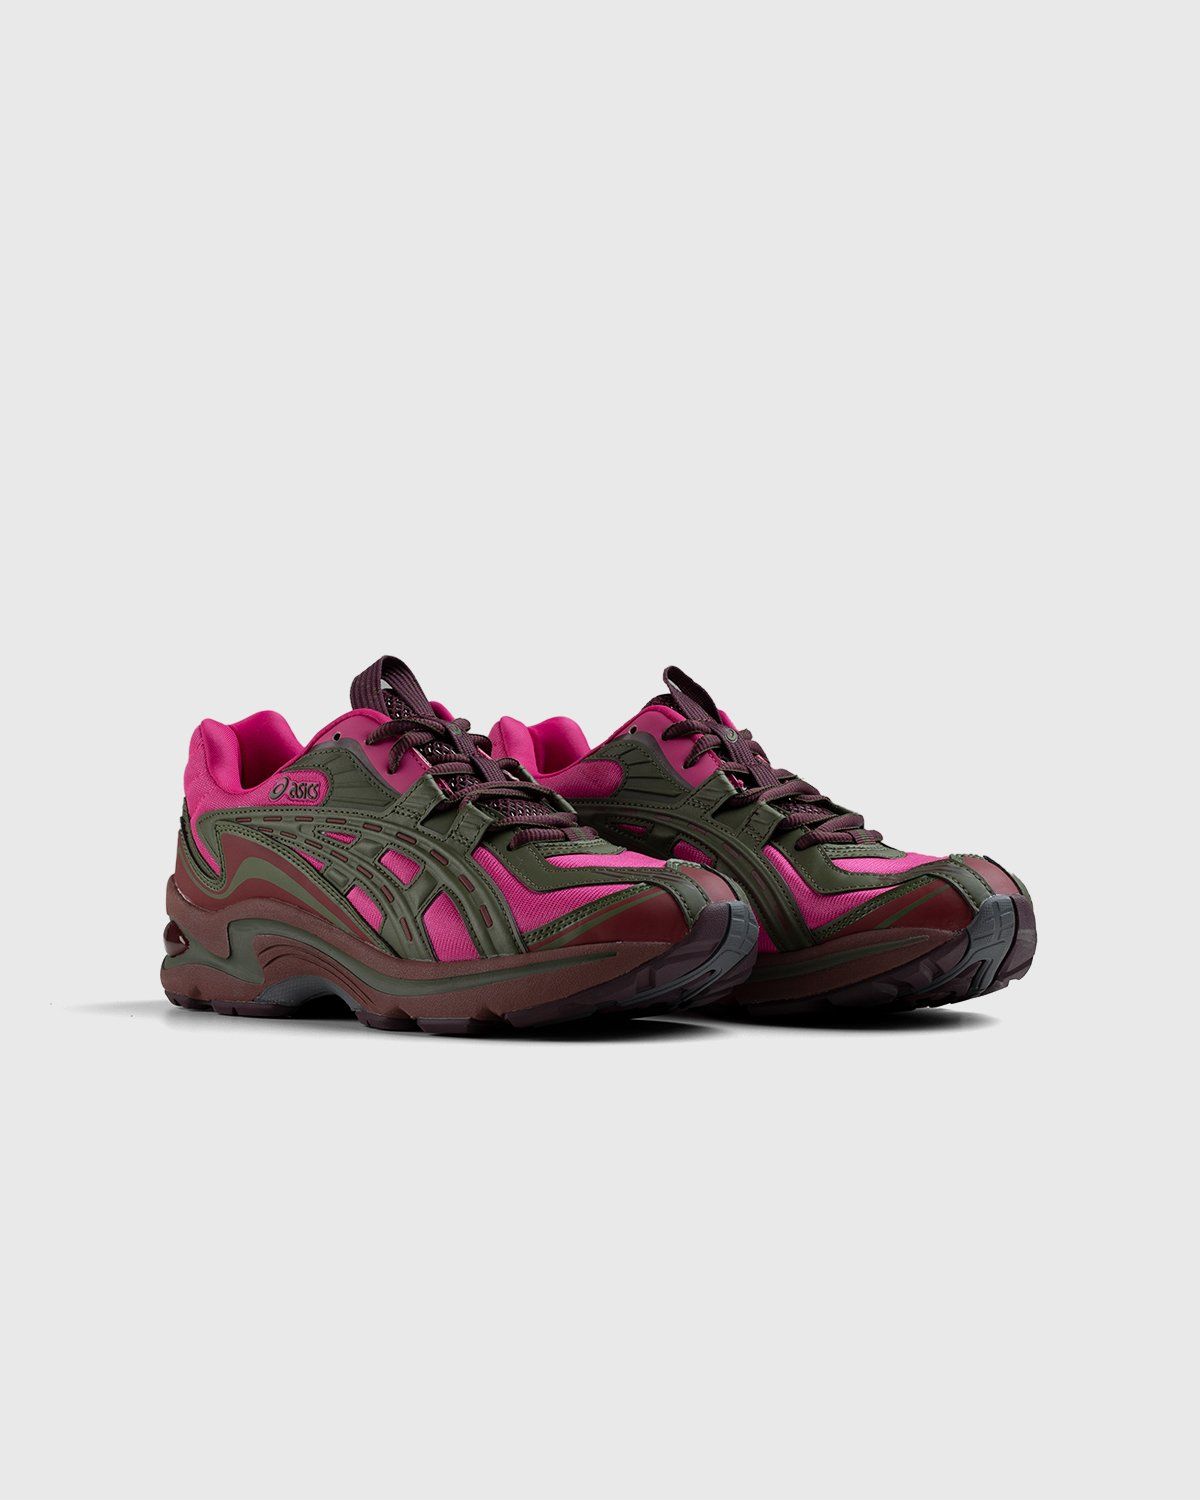 asics – FB1-S Gel-Preleus Pink Rave/Olive Canvas - Low Top Sneakers - Red - Image 2